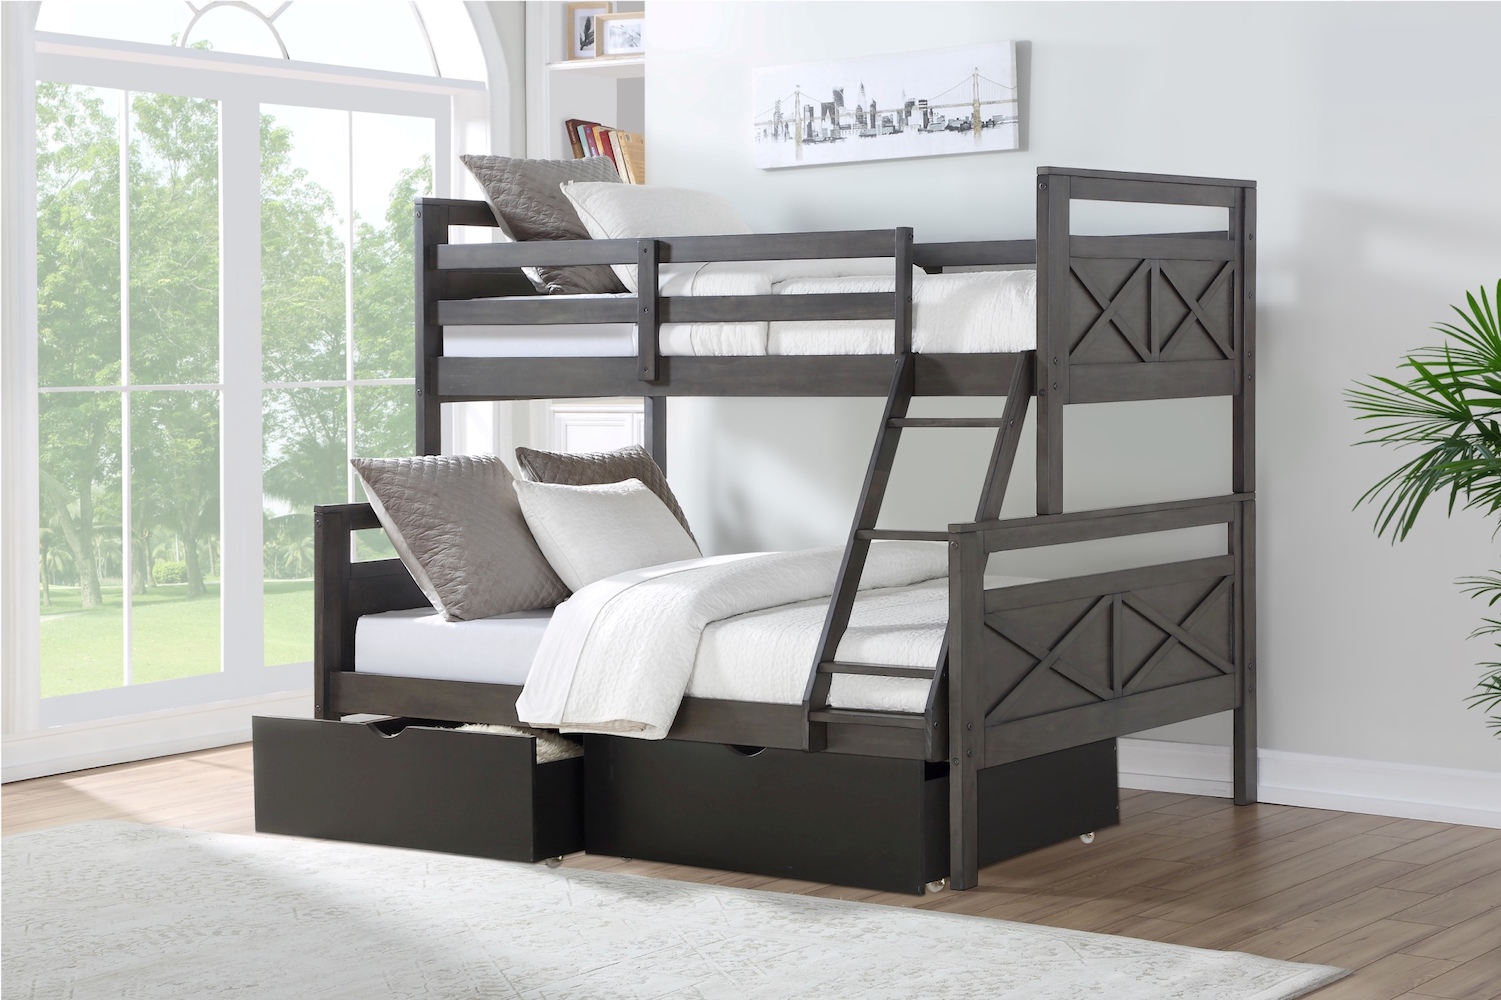 Donco Kids Twin Panel Bunkbed Dual